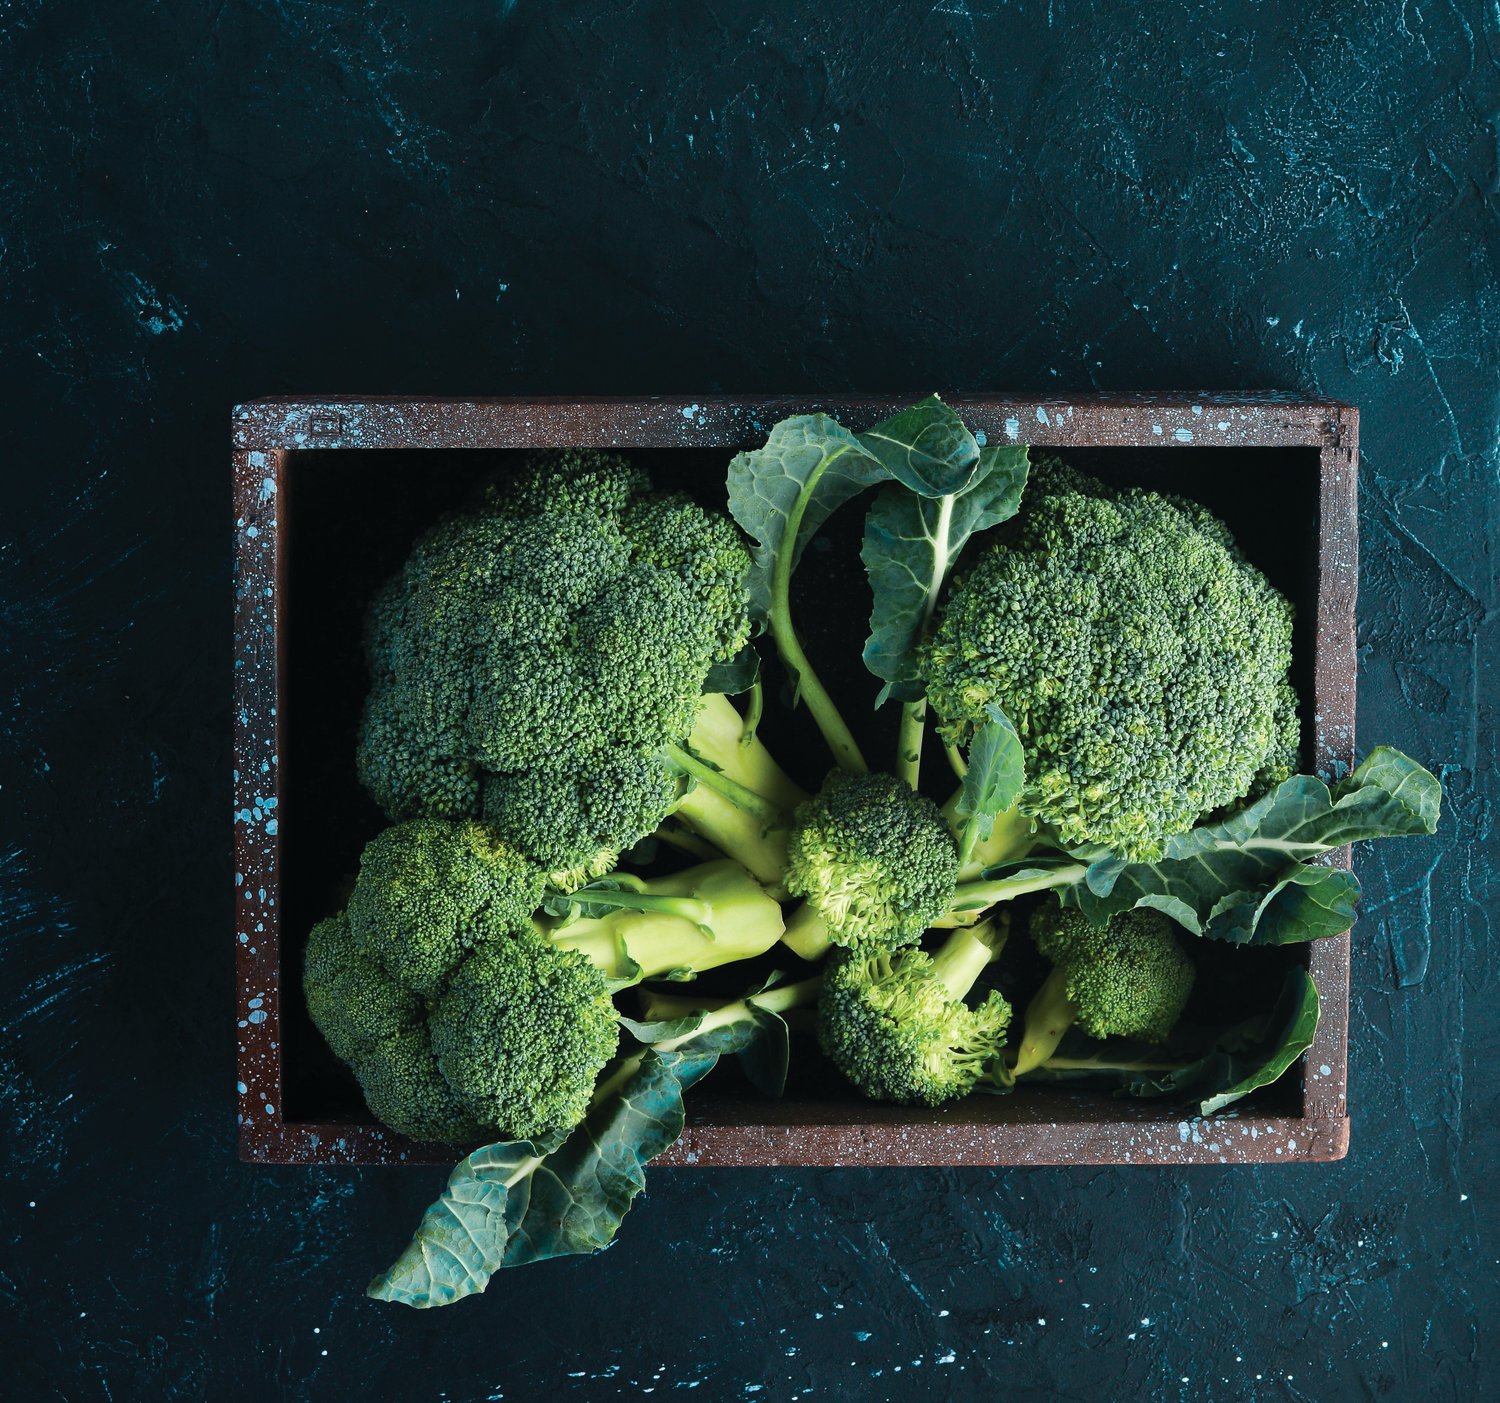 Broccoli can be a standout star in pastes for the base of layered flavors.